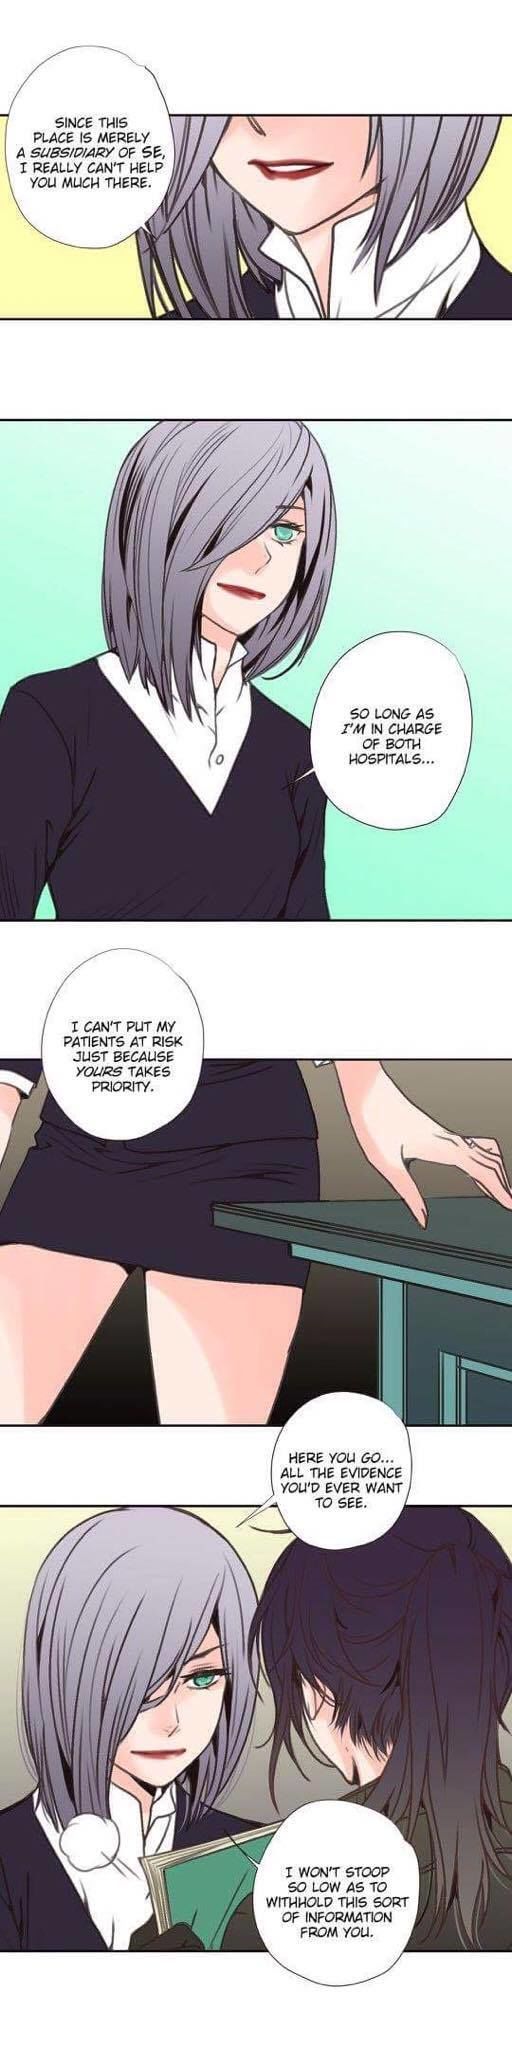 Pulse Chapter 049 page 4